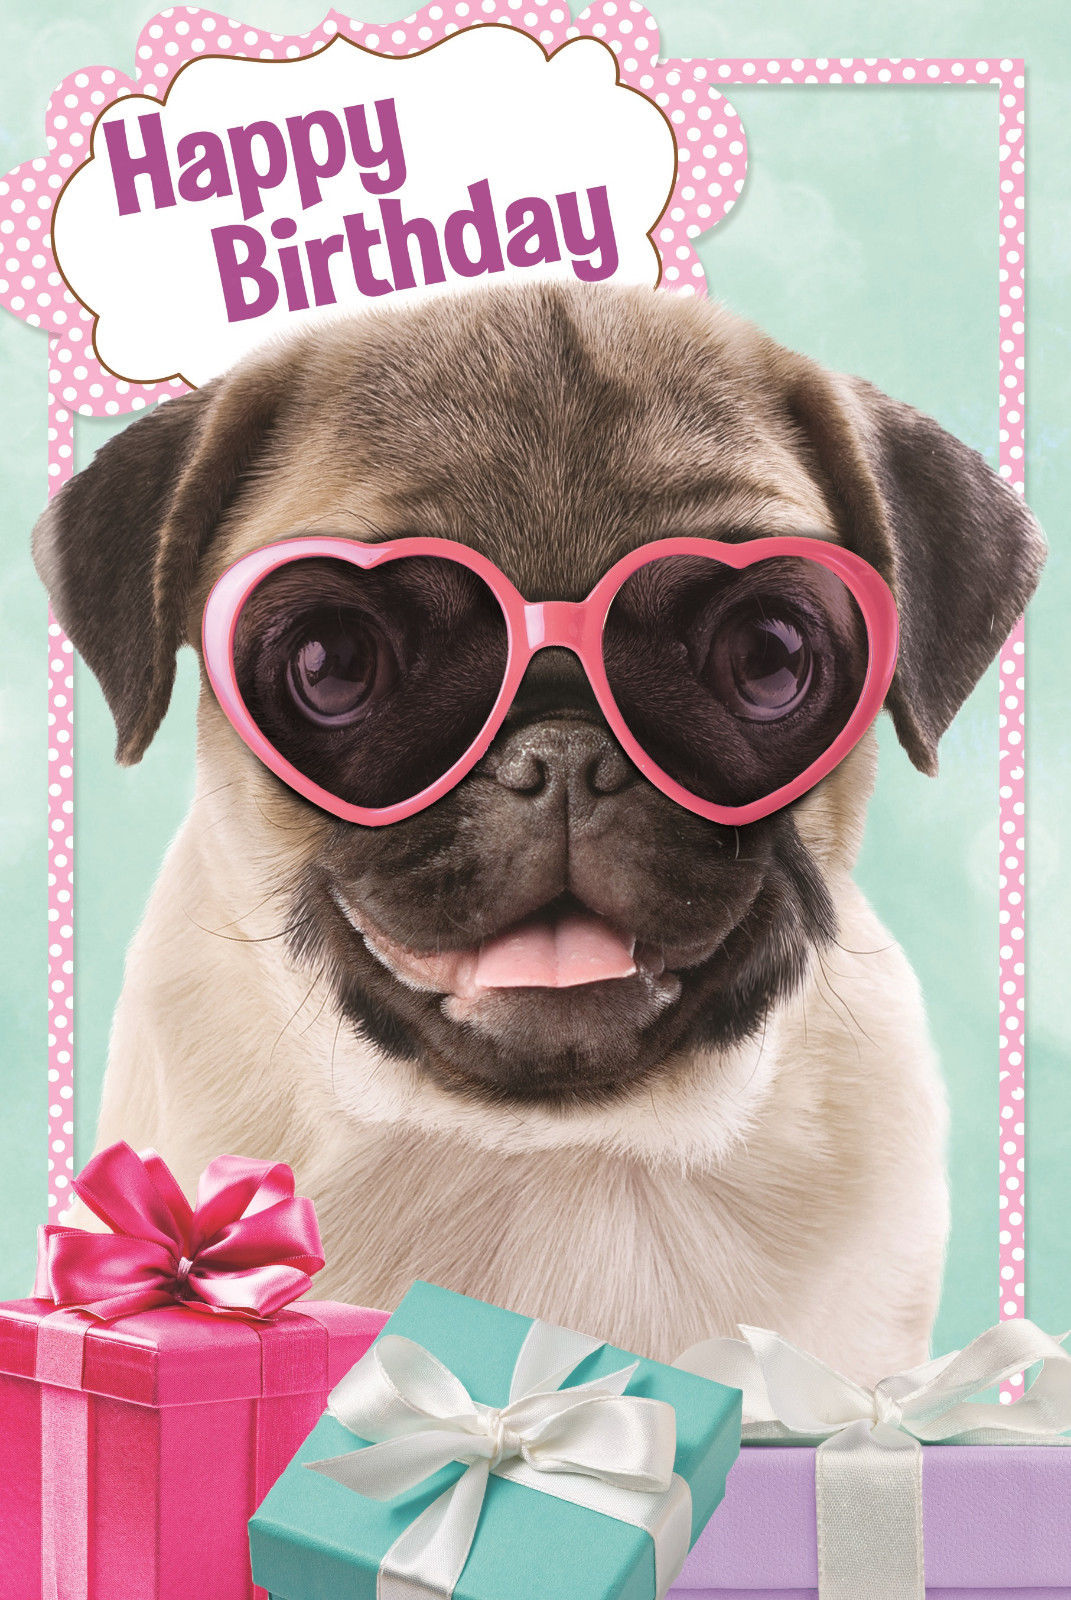 art-roller-skaters-30th-birthday-parties-pug-life-photo-effects